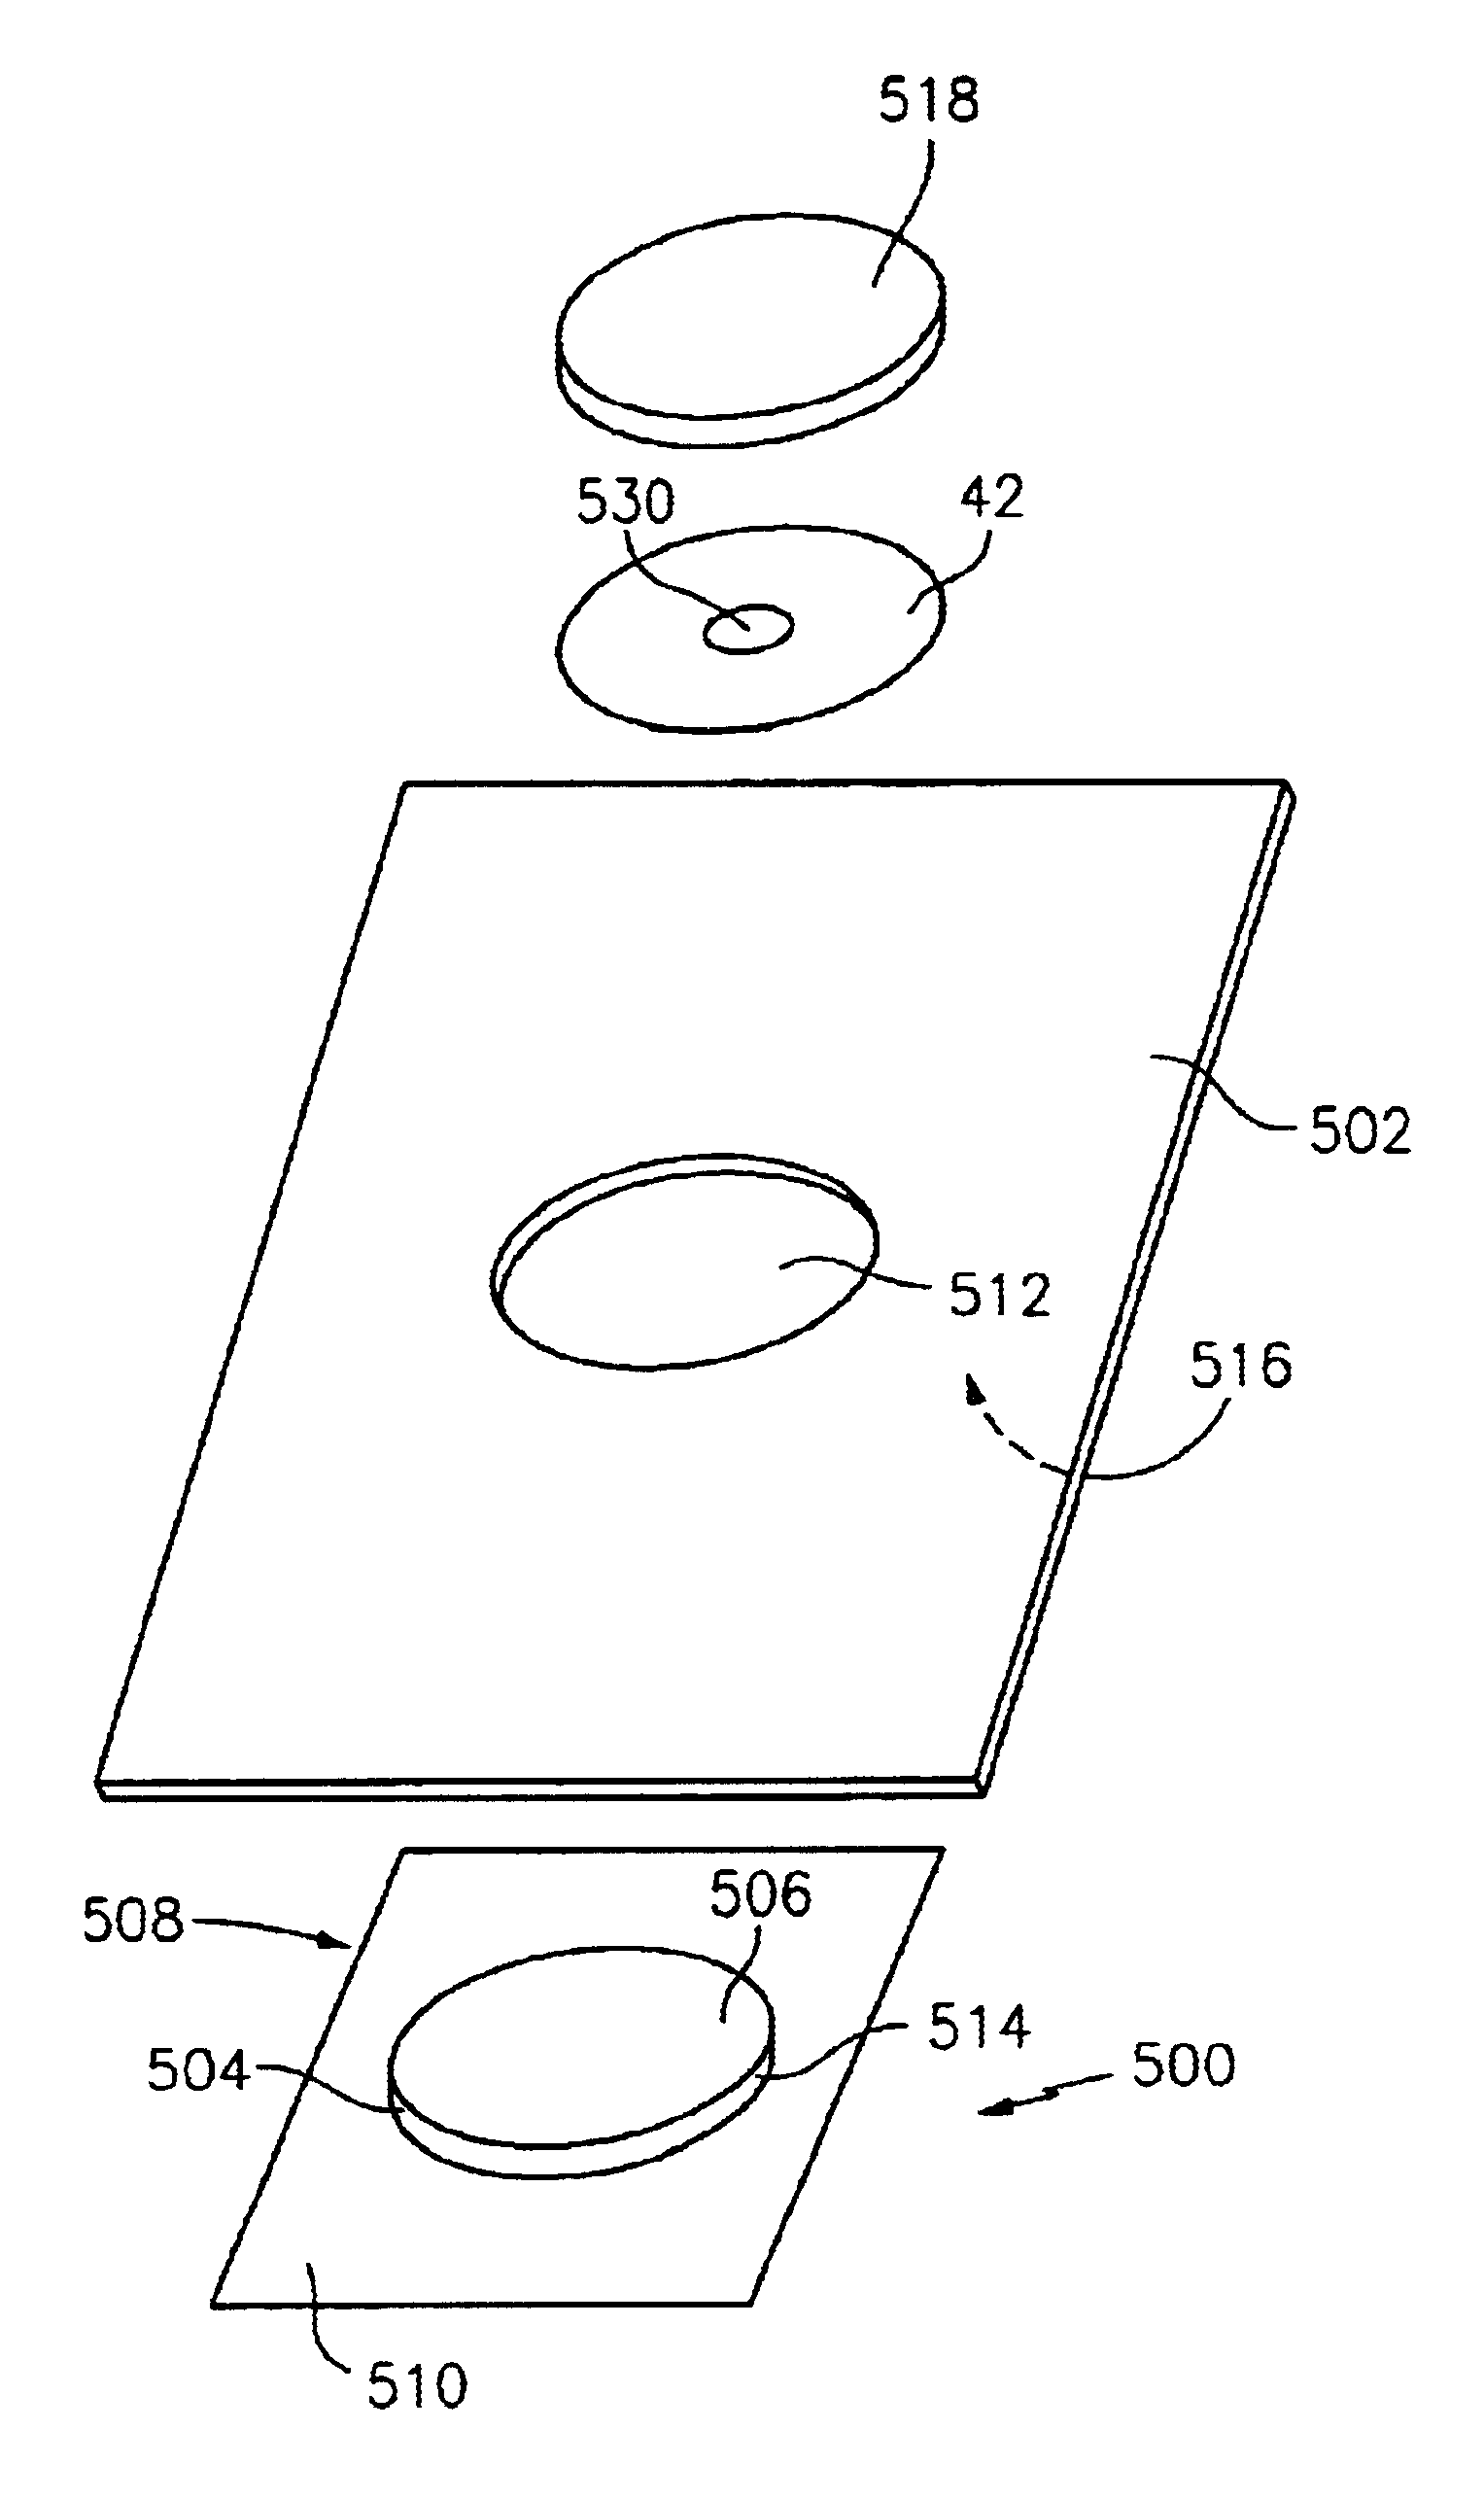 Portfolio packaging device for disc-shaped items and related materials and method for packaging such discs and material